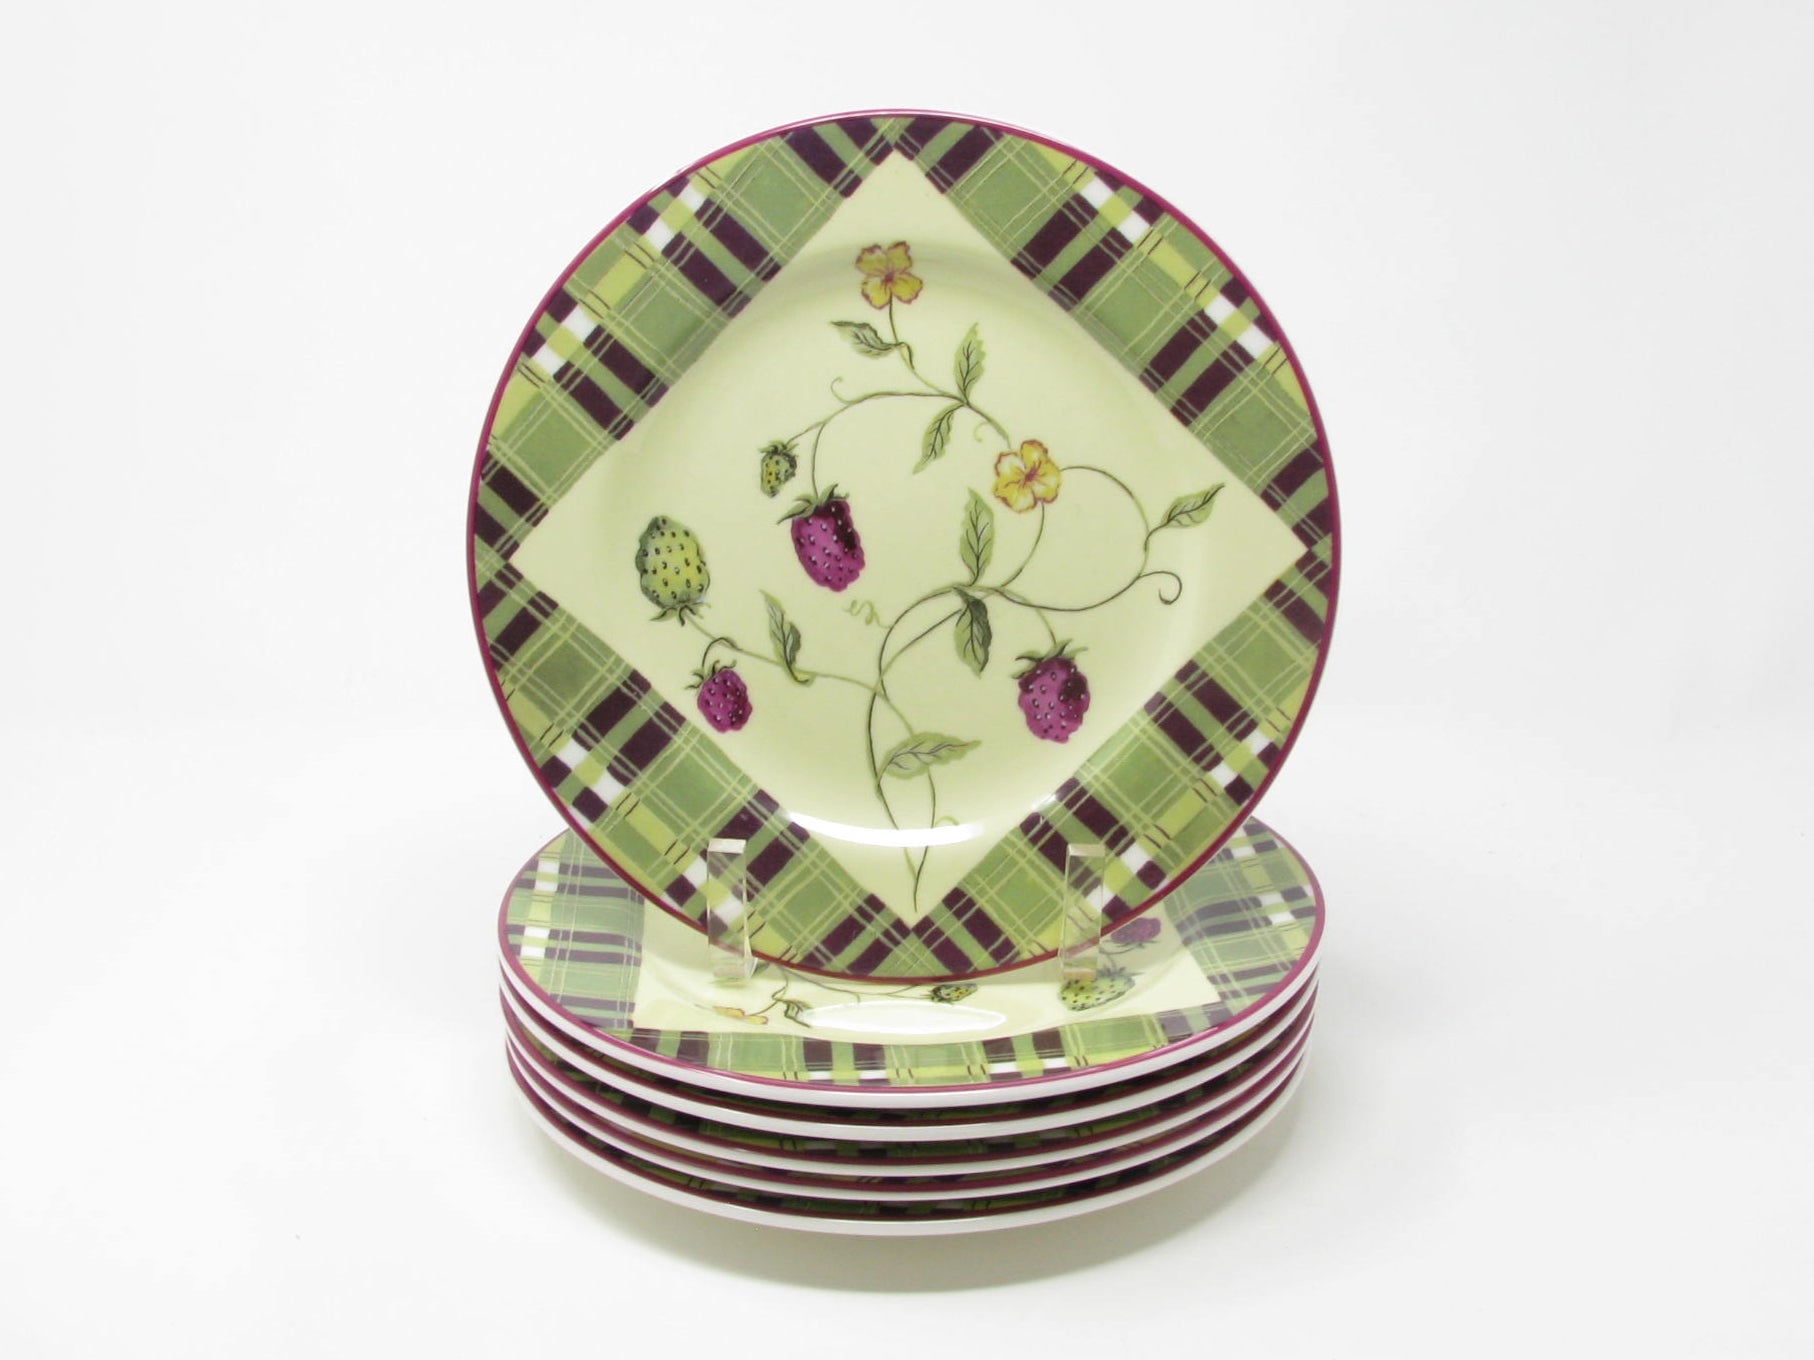 edgebrookhouse - Tracy Porter Sweet Briar Rose Ceramic Salad Plates with Berry and Butterfly Pattern - 6 Pieces